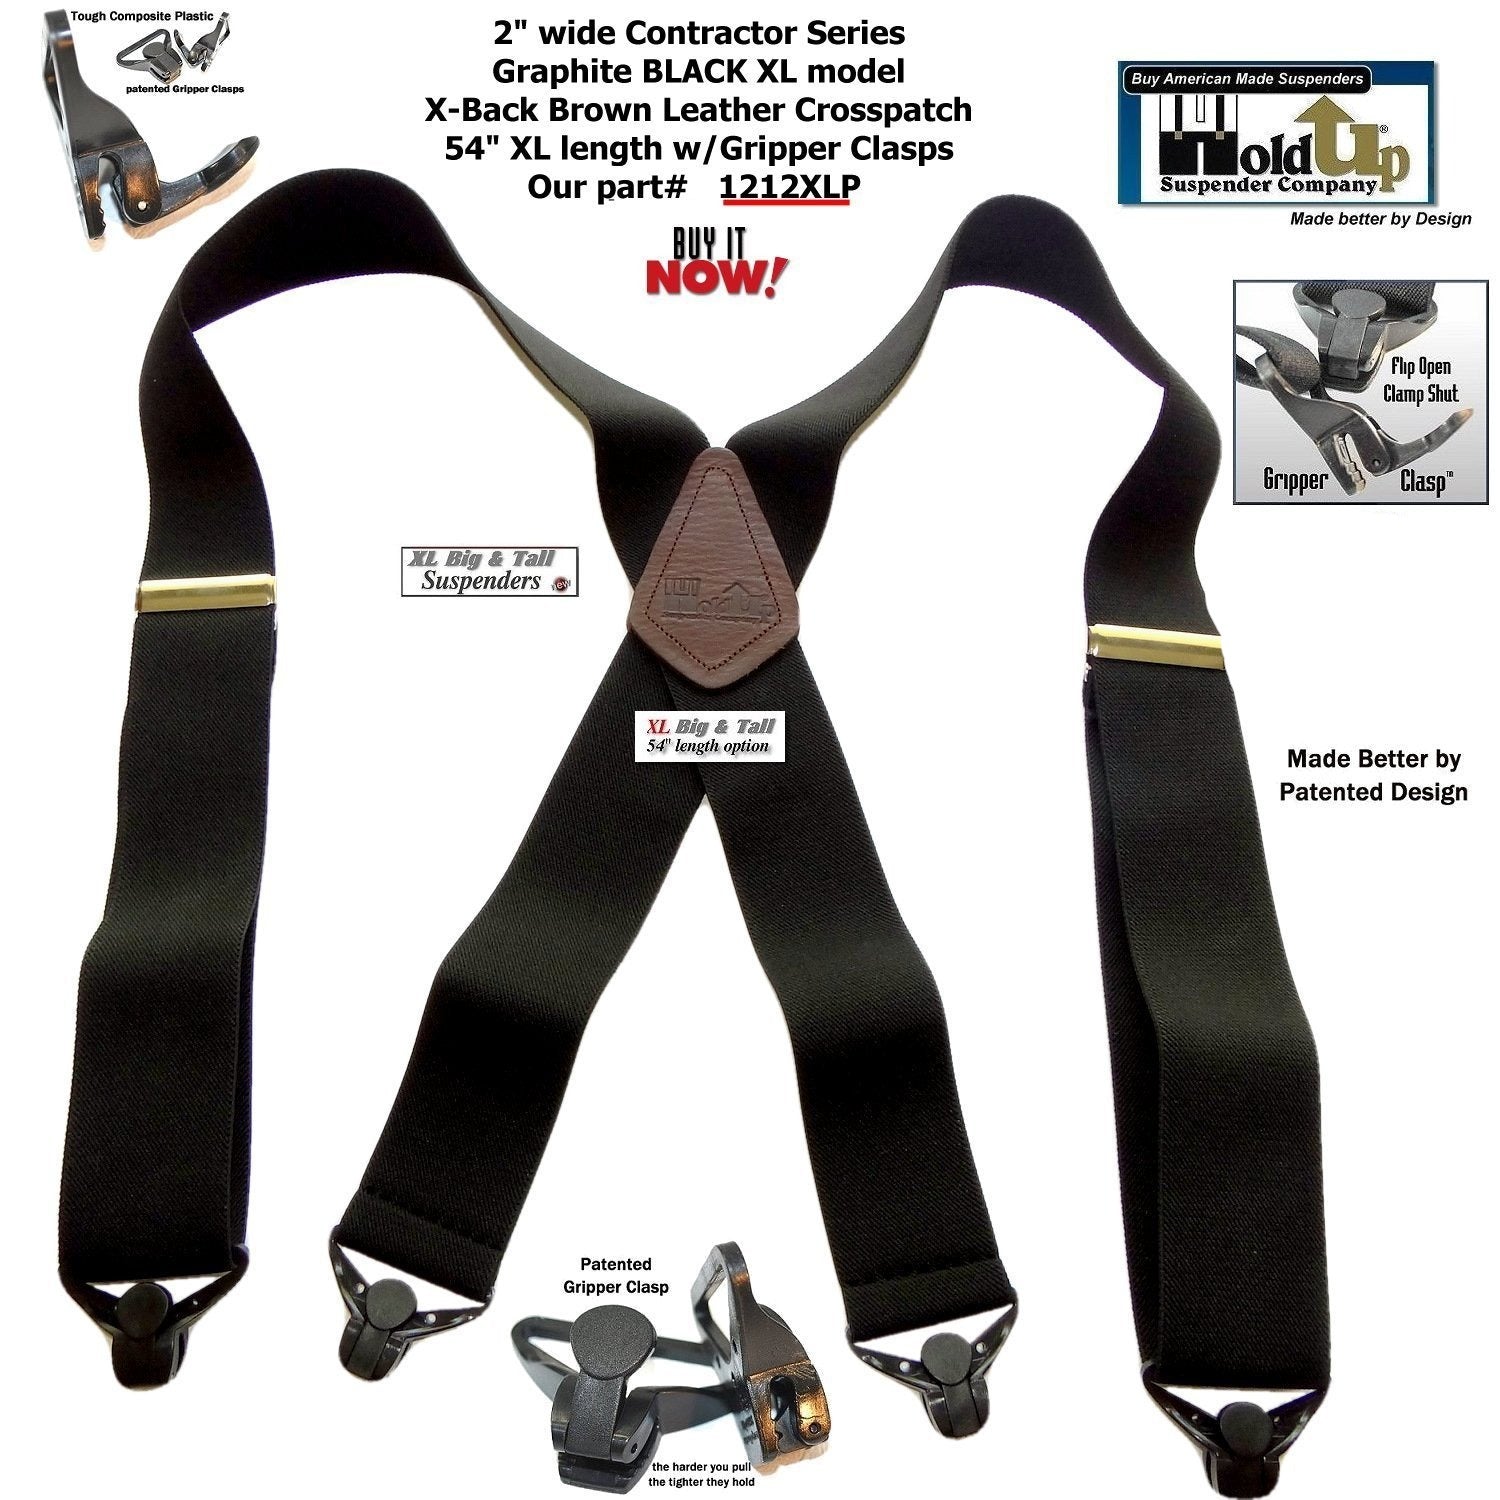 HoldUp Big and Tall XL Black 2 Suspenders with Gripper Clasps